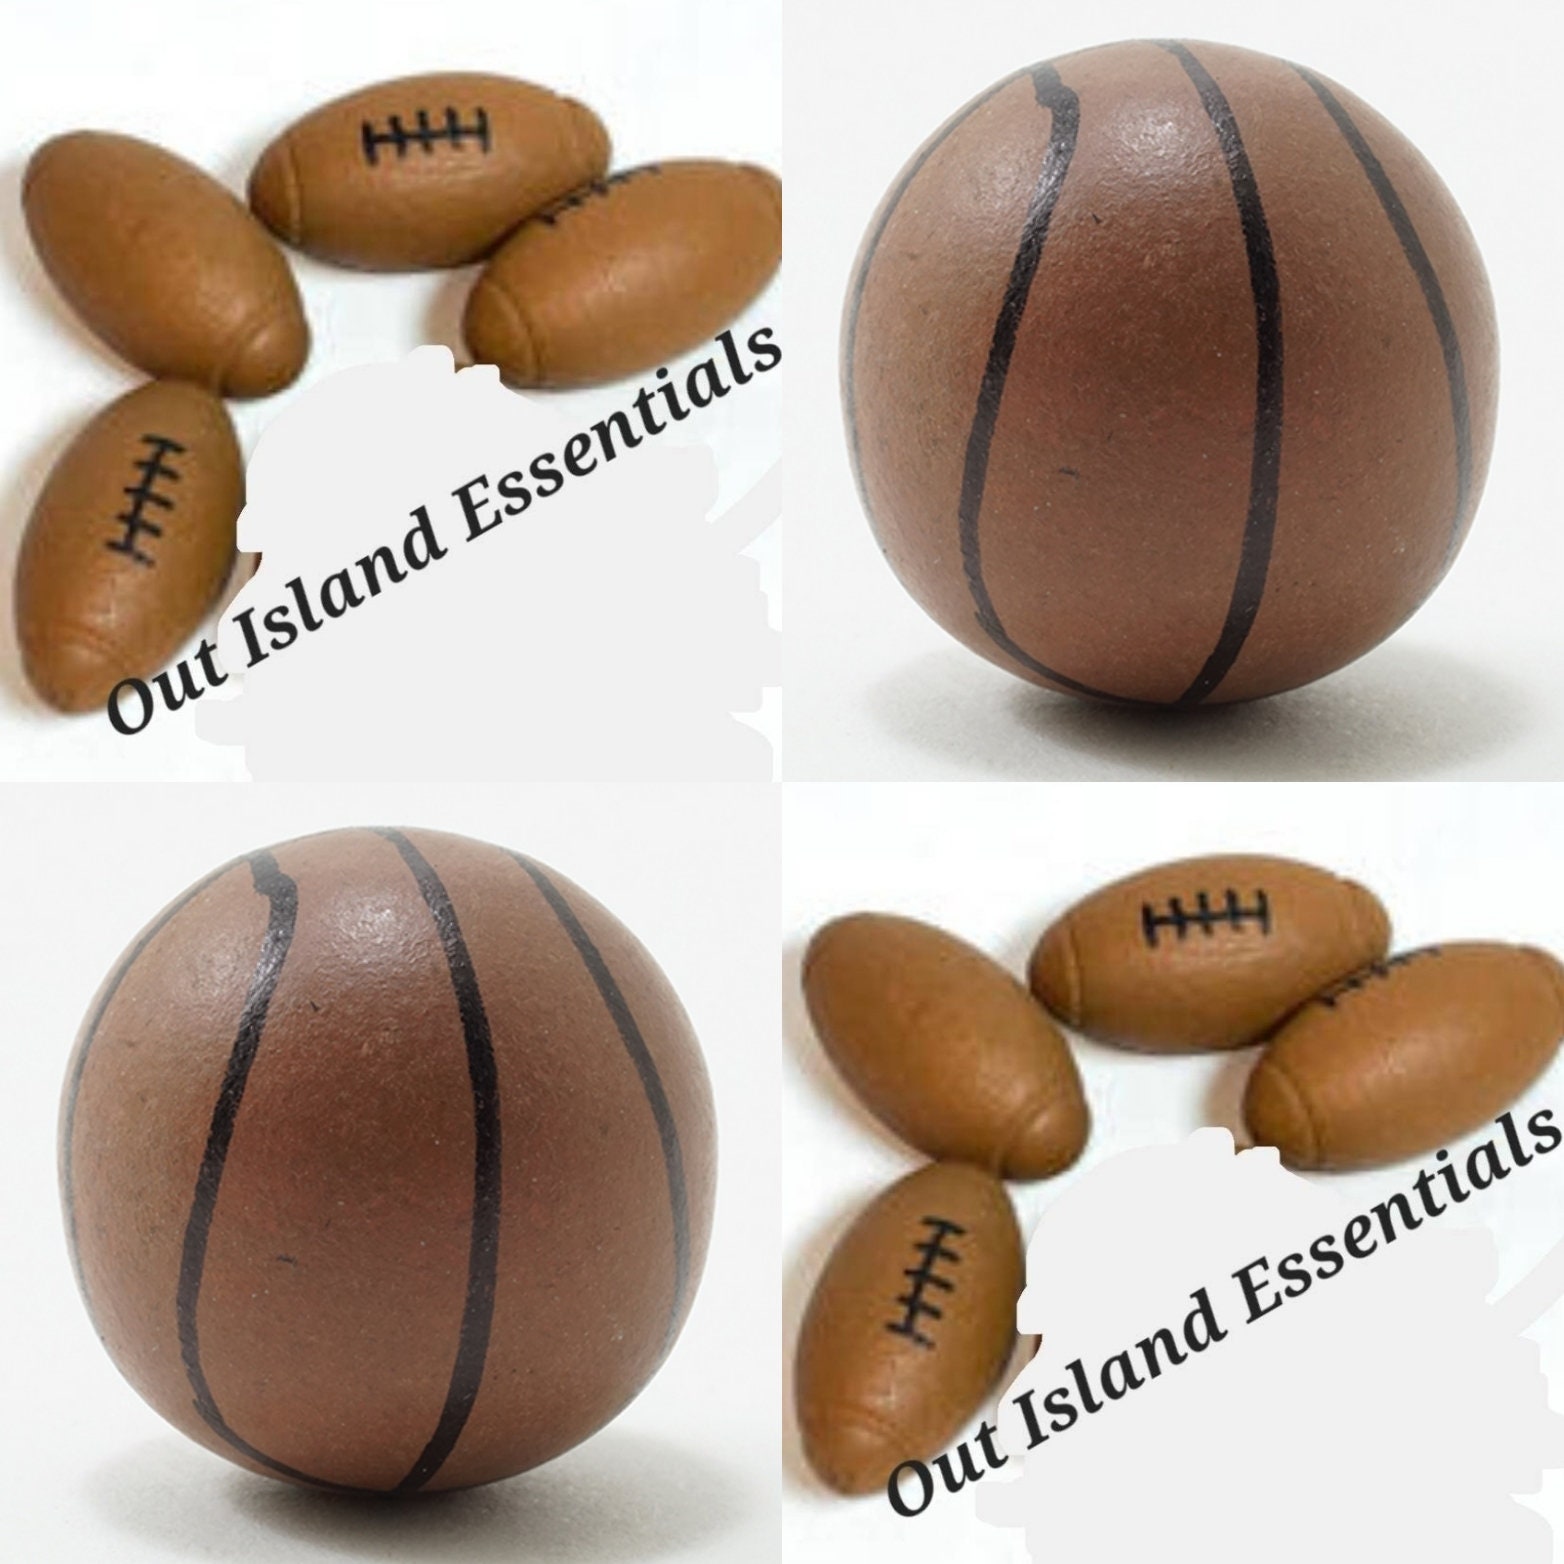 Wooden Balls for Crafts Hollow Balls Made of Natural Wood Raw Sphere for  DIY Processing Drawing Balls Woodworking 